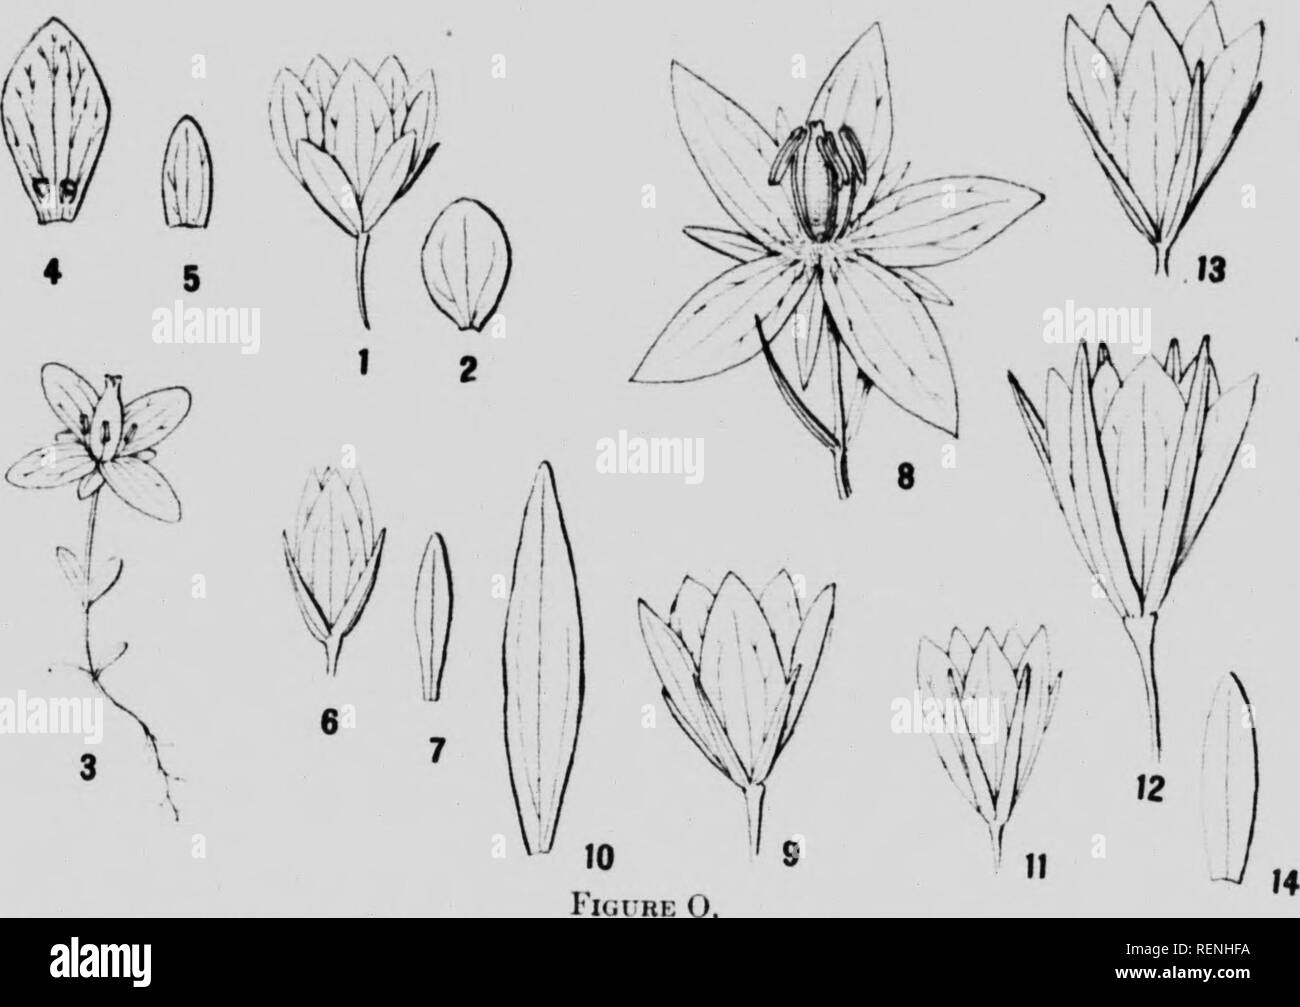 . Botany. Part B [microform] : contributions to the morphology, synonymy, and geographical distribution of Arctic plants. Canadian Arctic Expedition (1913-1918); Canadian Arctic Expedition (1913-1918); Botanique; Plantes; Botany; Botany. o4 B Cuniiiliiiri AI die Expedition, t9l3-IS Pleurogyne Ksih. nn .l).^'&quot;'*' /â â &quot;&quot;'&quot;'&quot;/'â¢â¢'r''- '&quot;'^ '&quot;â â¢'&quot; nM.,.nl,.,| fnân .,..it&lt;. a ,.uiÂ»b..r of stall ,T'. V &quot;&quot;&quot;&quot;&quot;'â¢ â¢'.'â â¢ &quot;â¢&quot;' â¢'&quot;â¢ Hfx'ky Miountii lis south t., lul ;{Â«)&quot; /' rar//,/A, (.nsol, has not wâh  Stock Photo